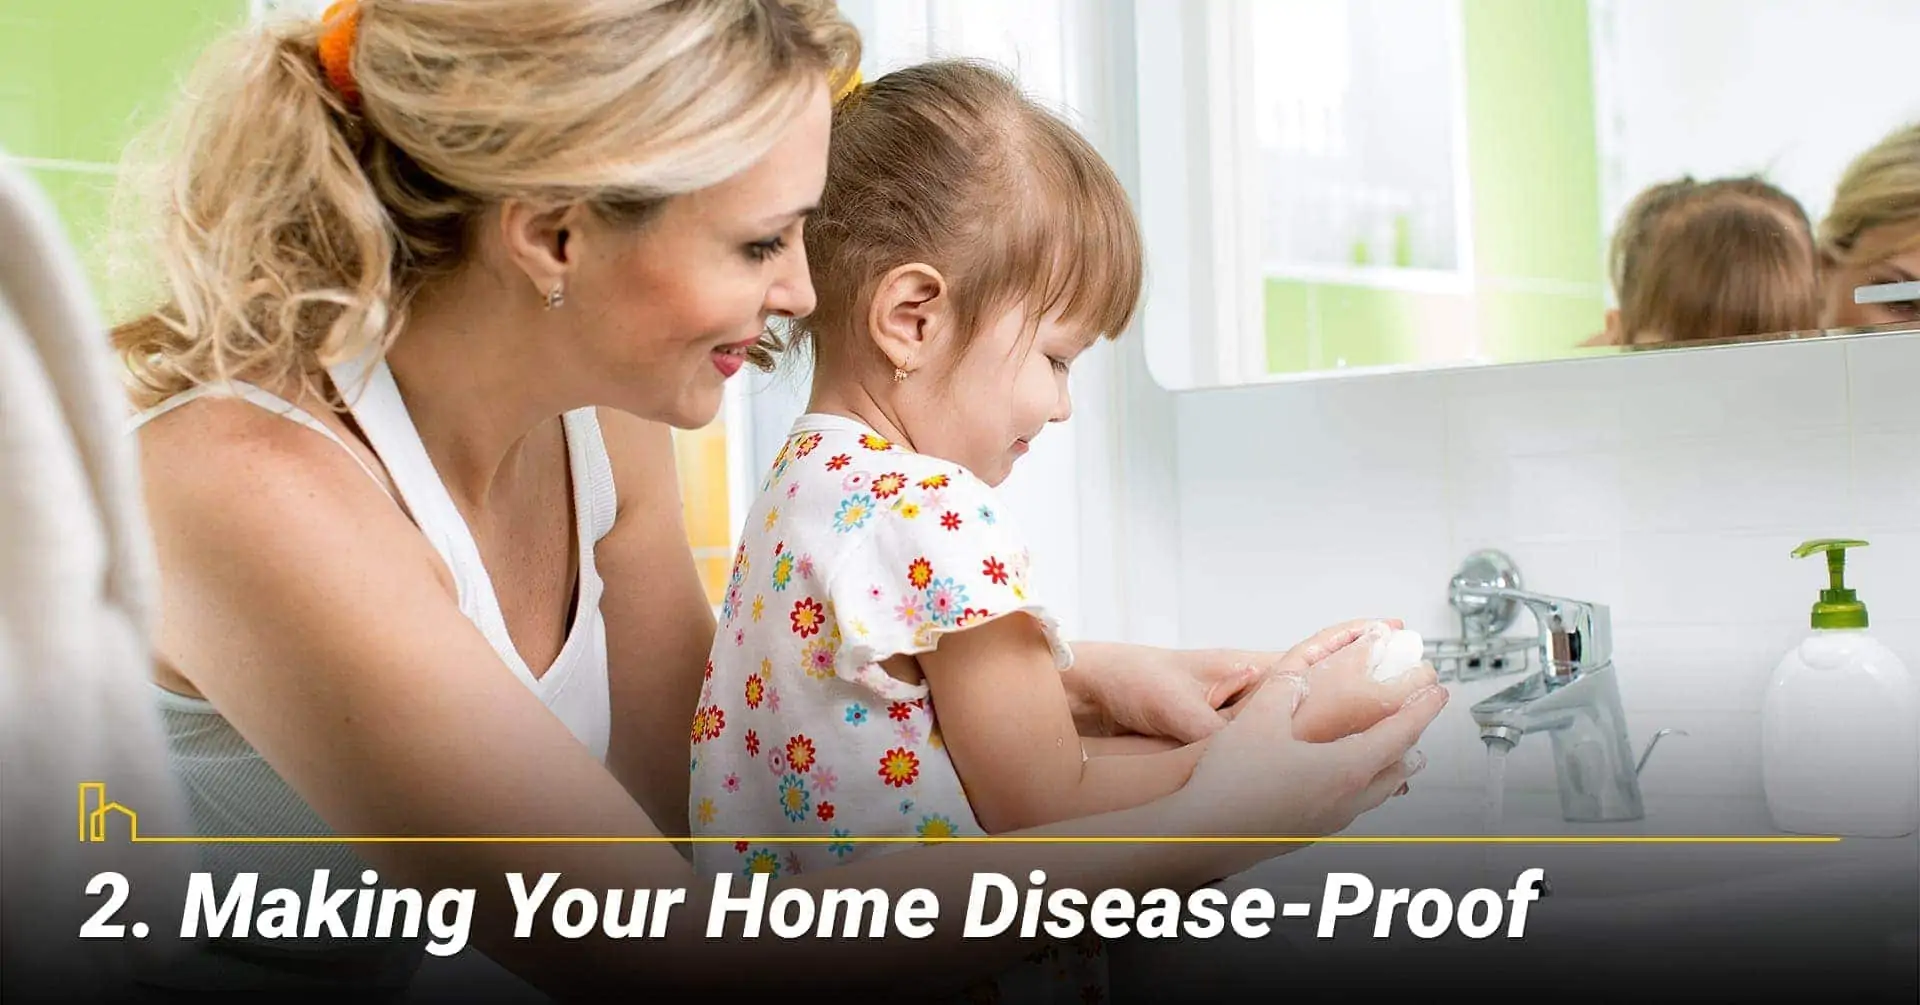 Making Your Home Disease-Proof, sanitize every surface